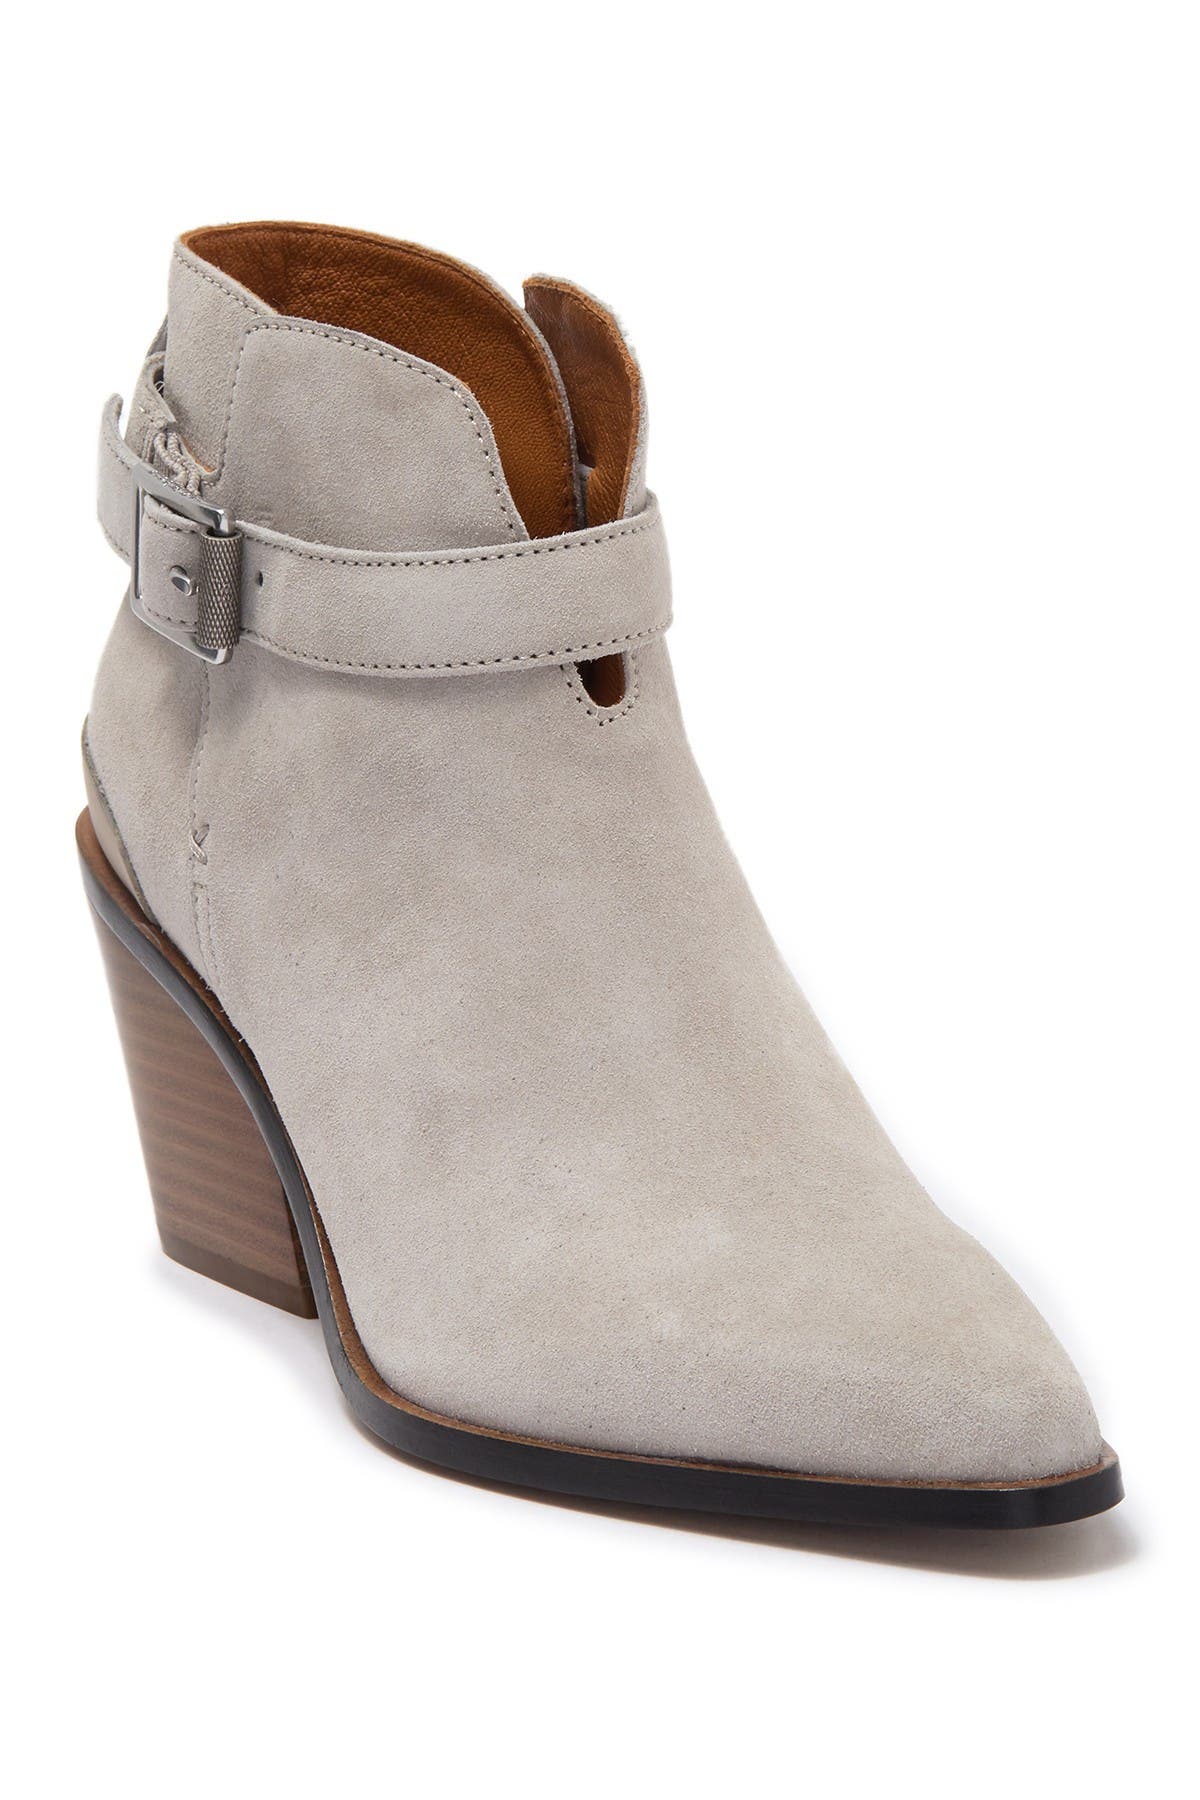 rag and bone boots nordstrom